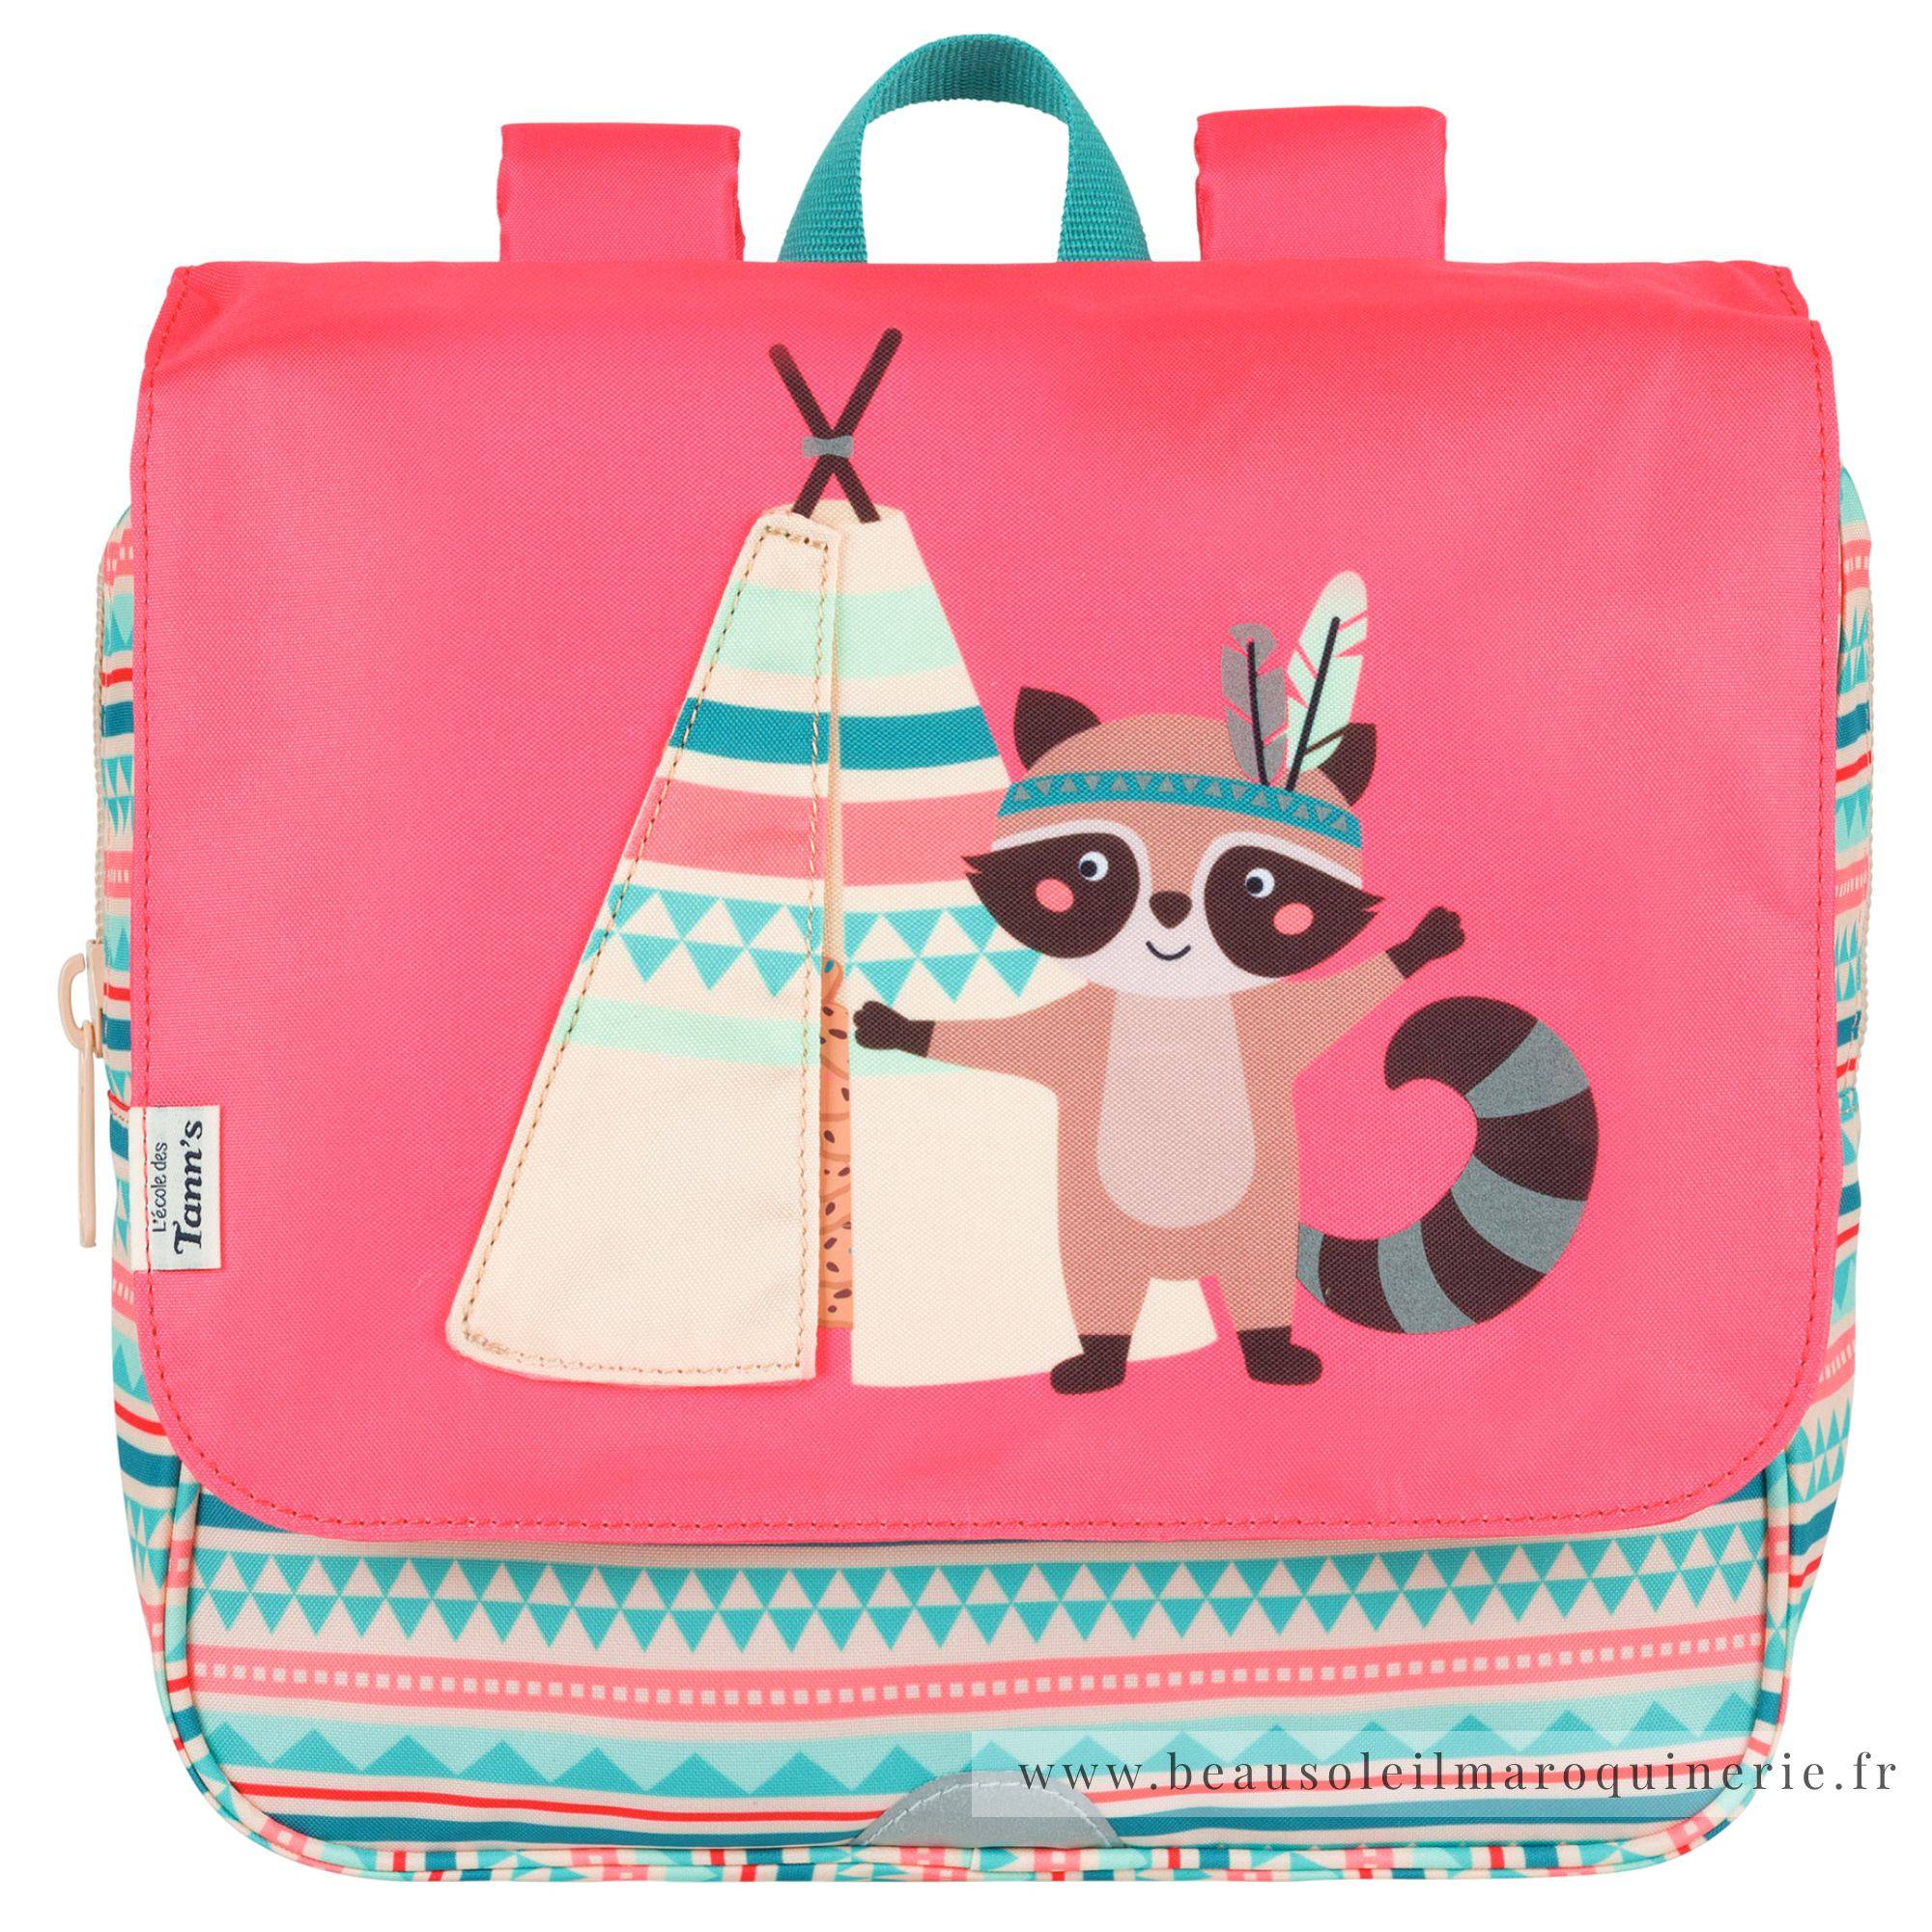 Cartable souple sac coulissant assorti Tann's Tipi 65524. Maternelle